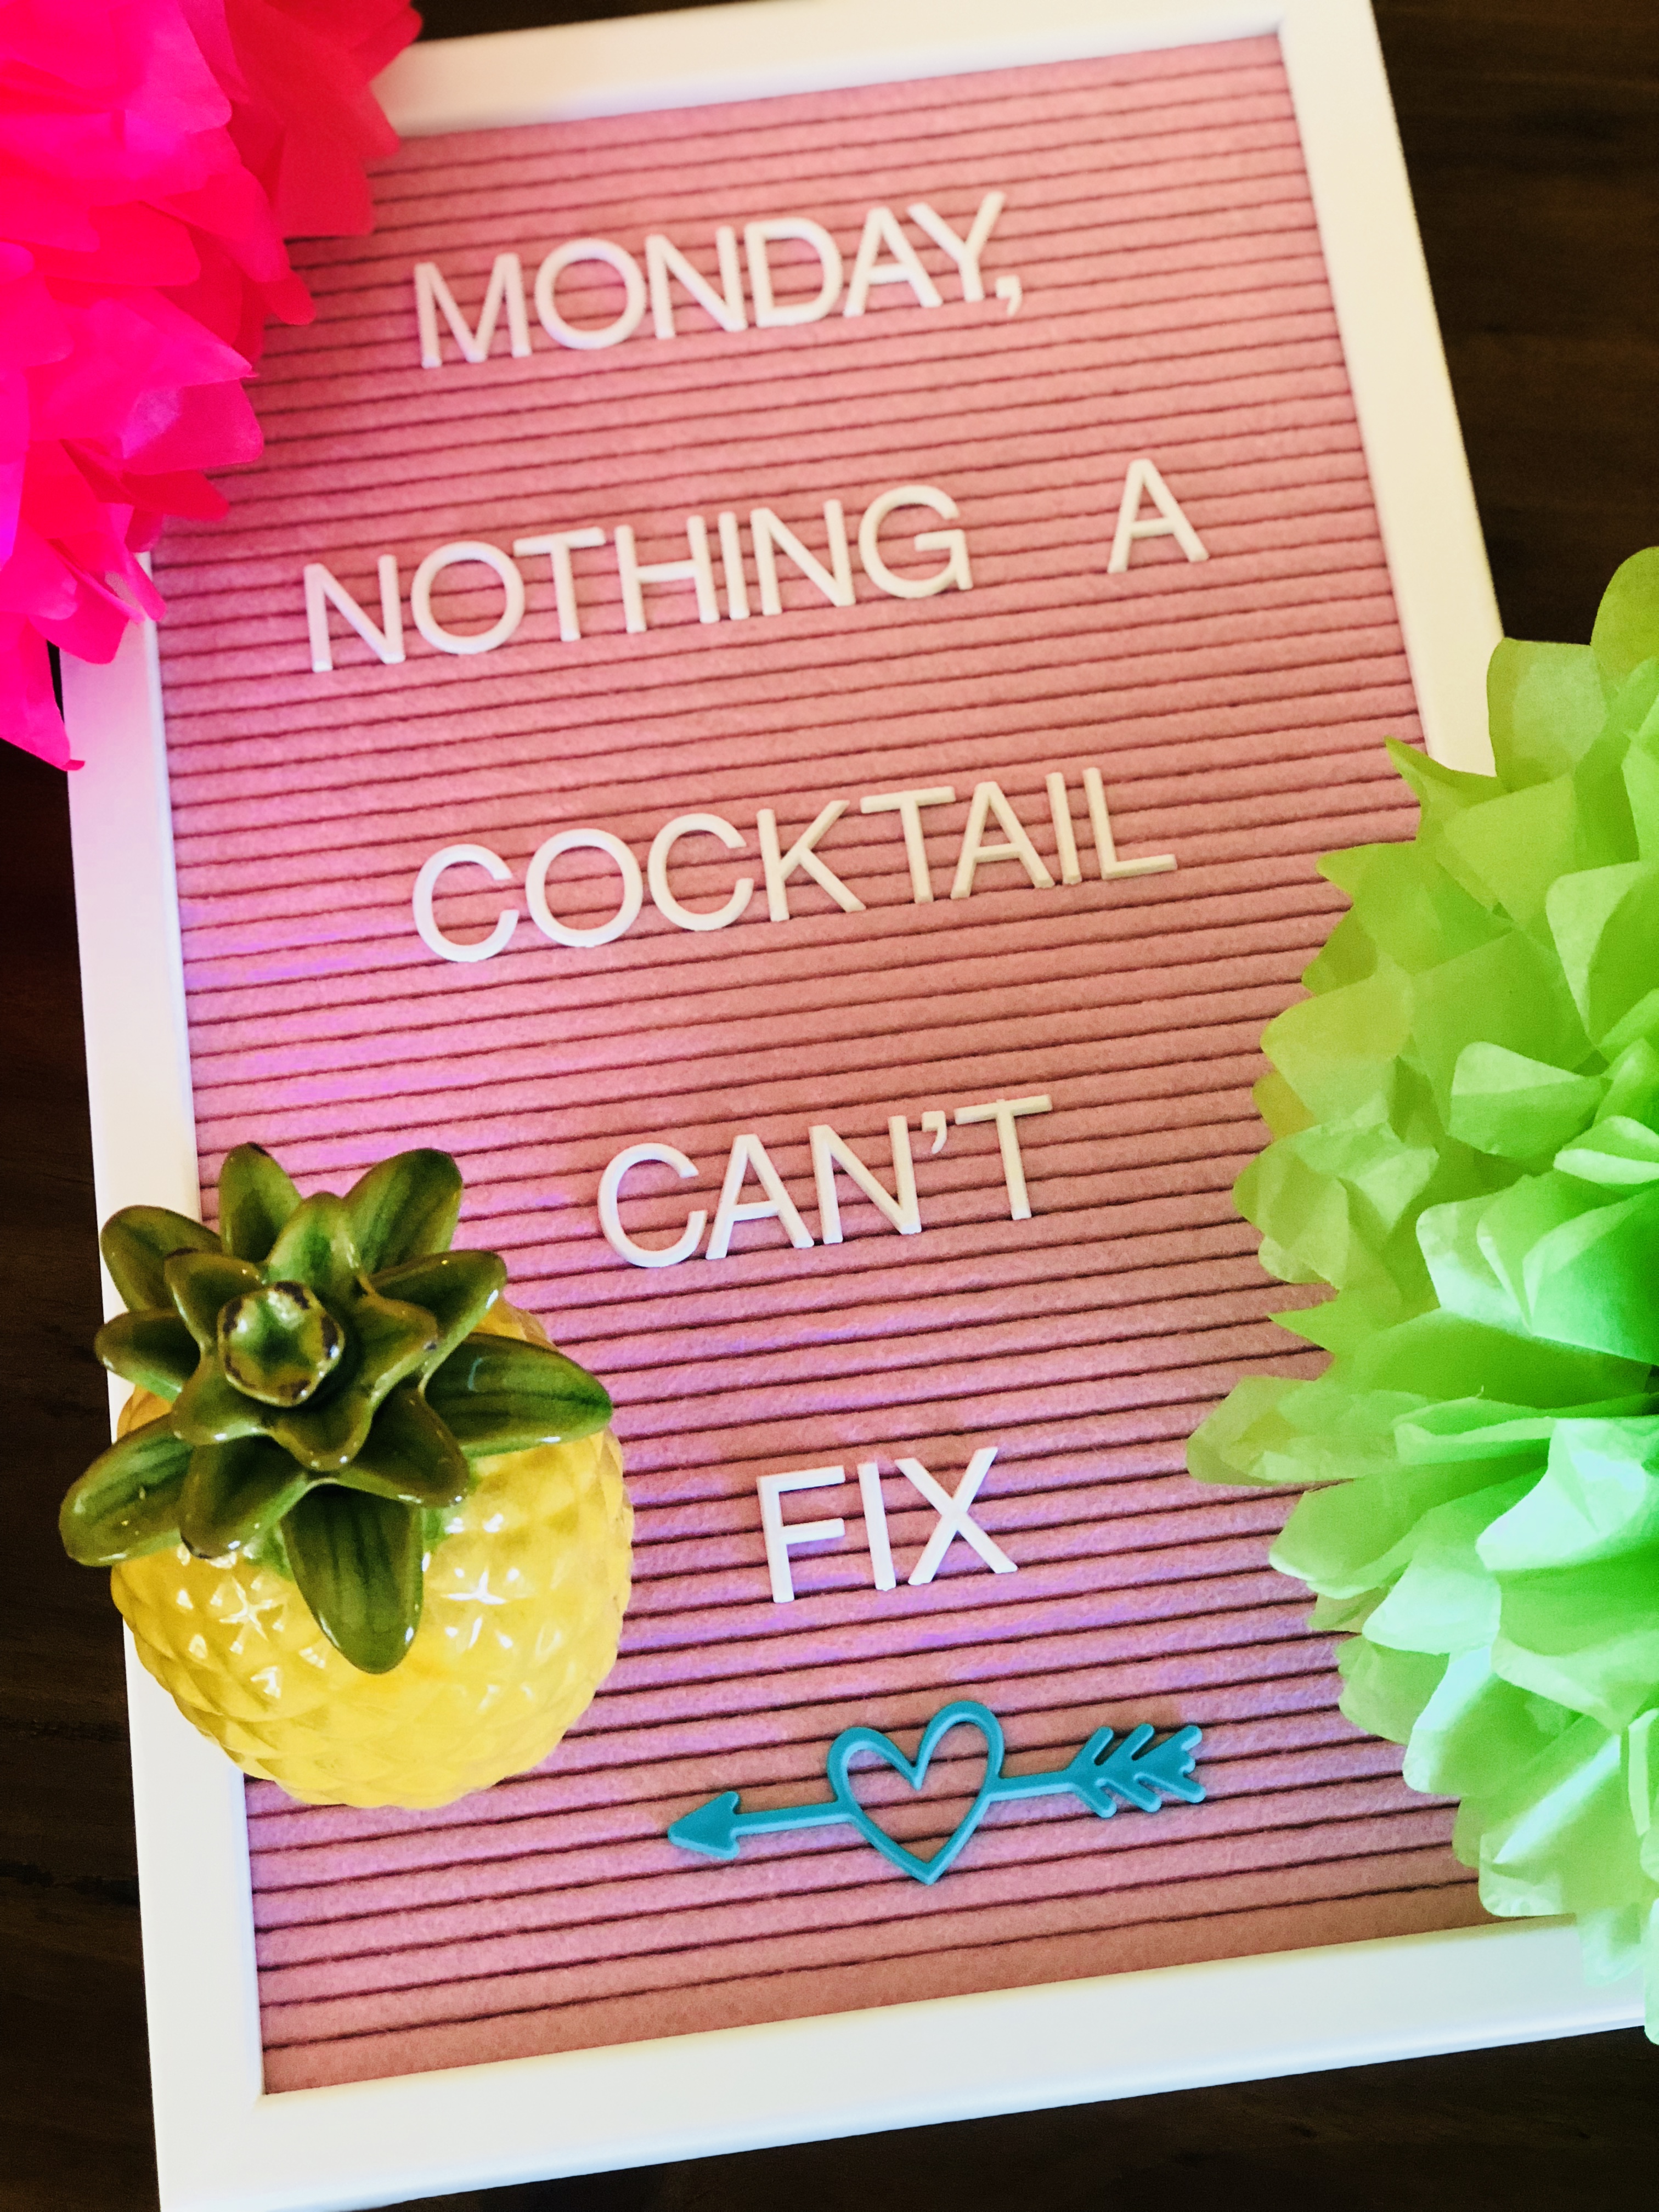 Letterboard Quote – Monday, Nothing a Cocktail Can’t Fix